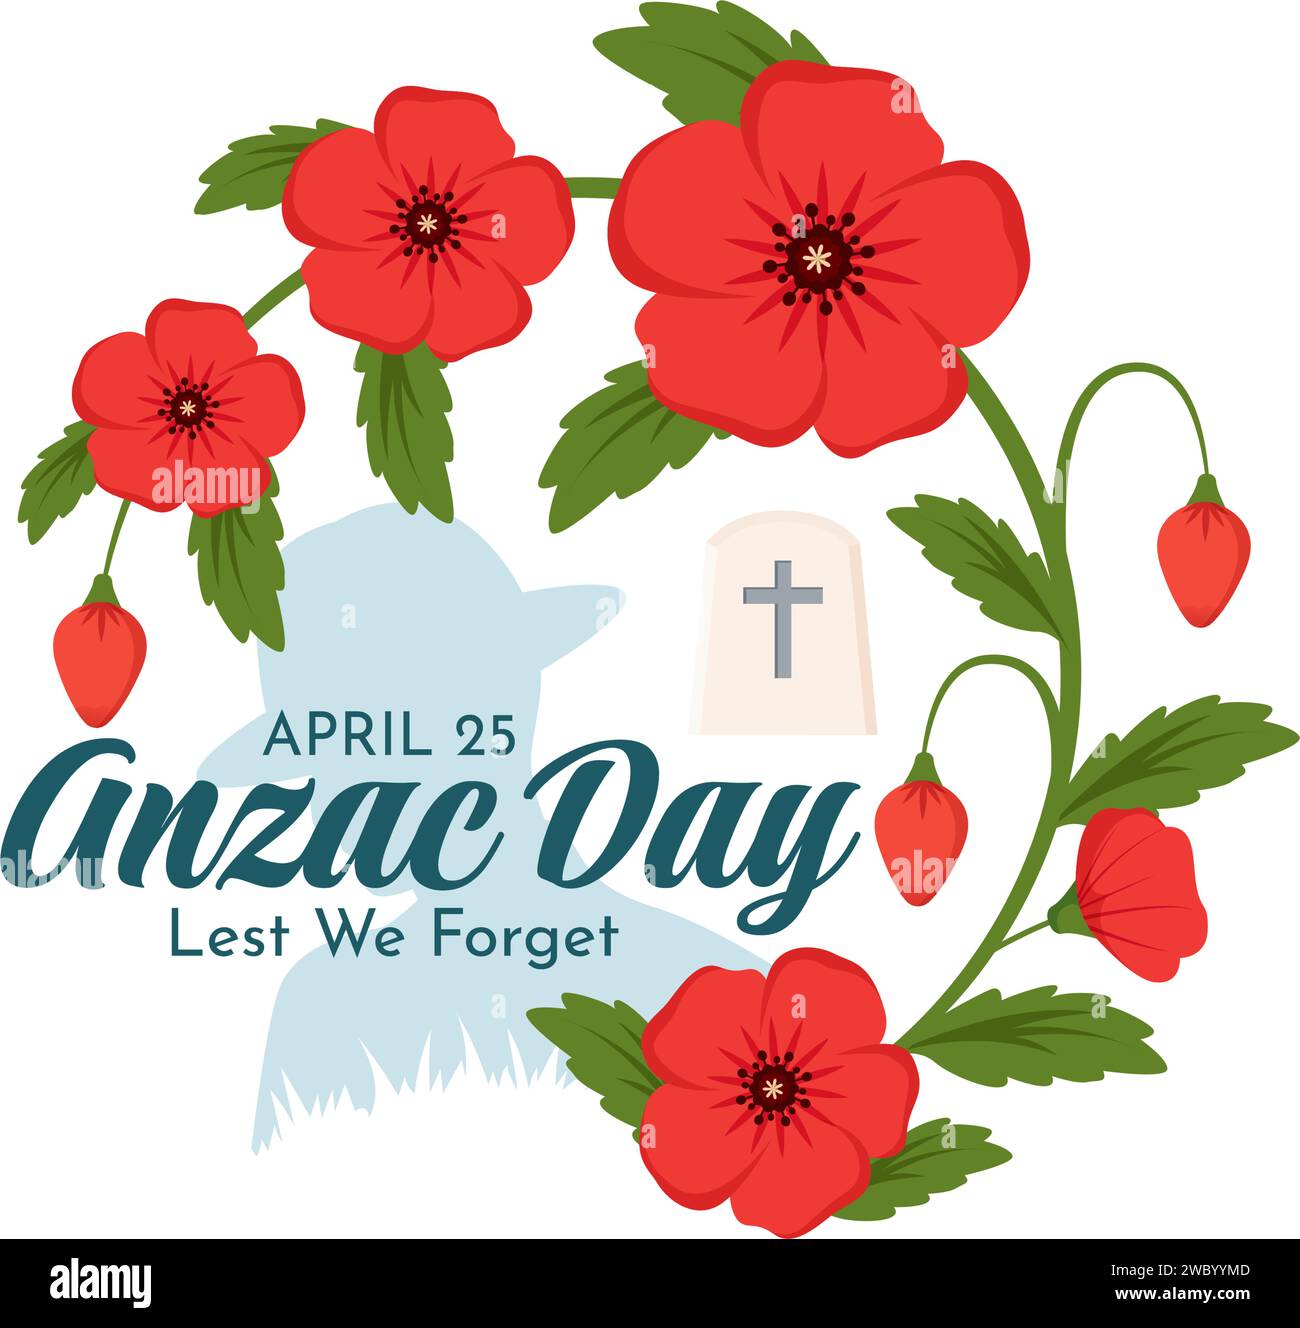 Anzac Day of Lest We Forget Vector Illustration on 25 April with Remembrance Soldier Paying Respect and Red Poppy Flower in Flat Cartoon Background Stock Vector